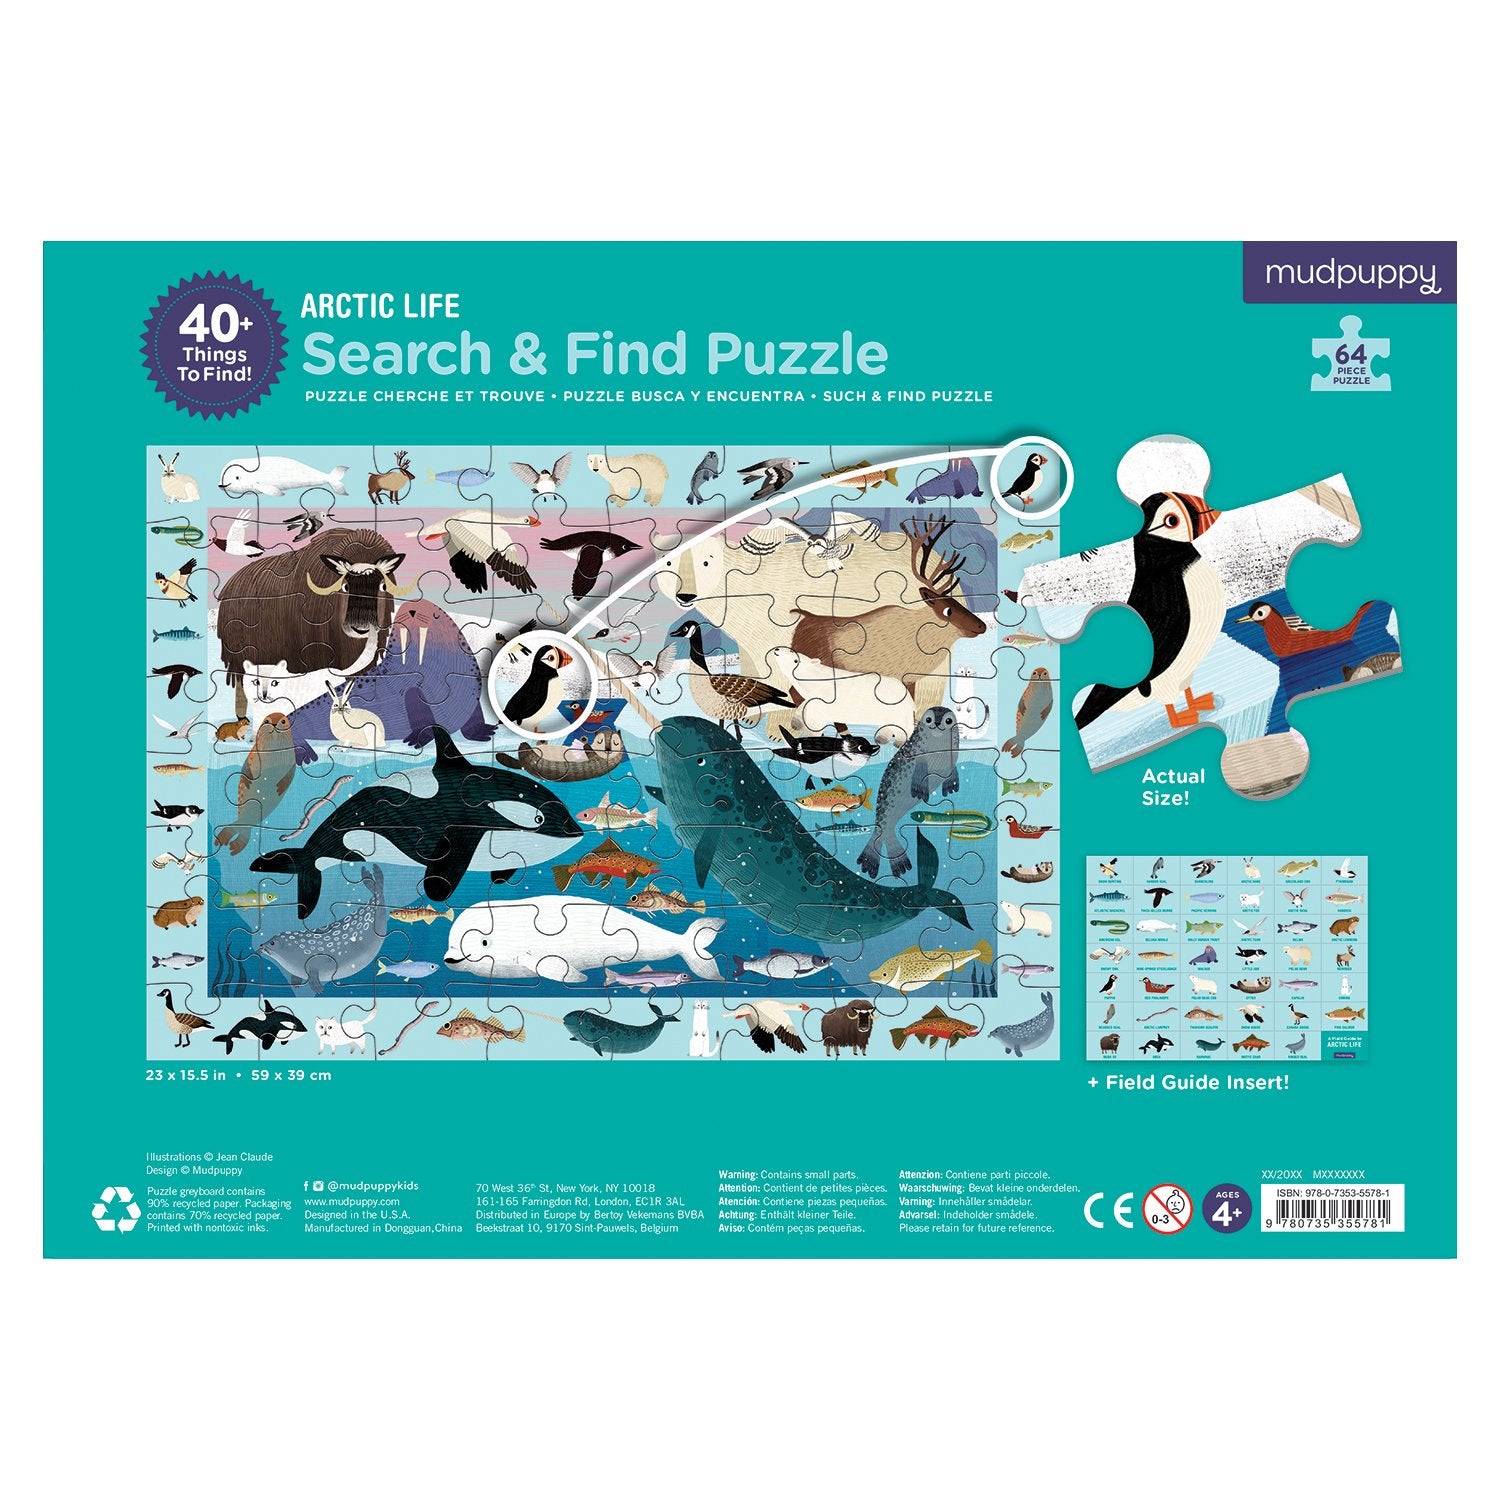 Mud Puppy | Search & Find Puzzle 64pc - Arctic Life